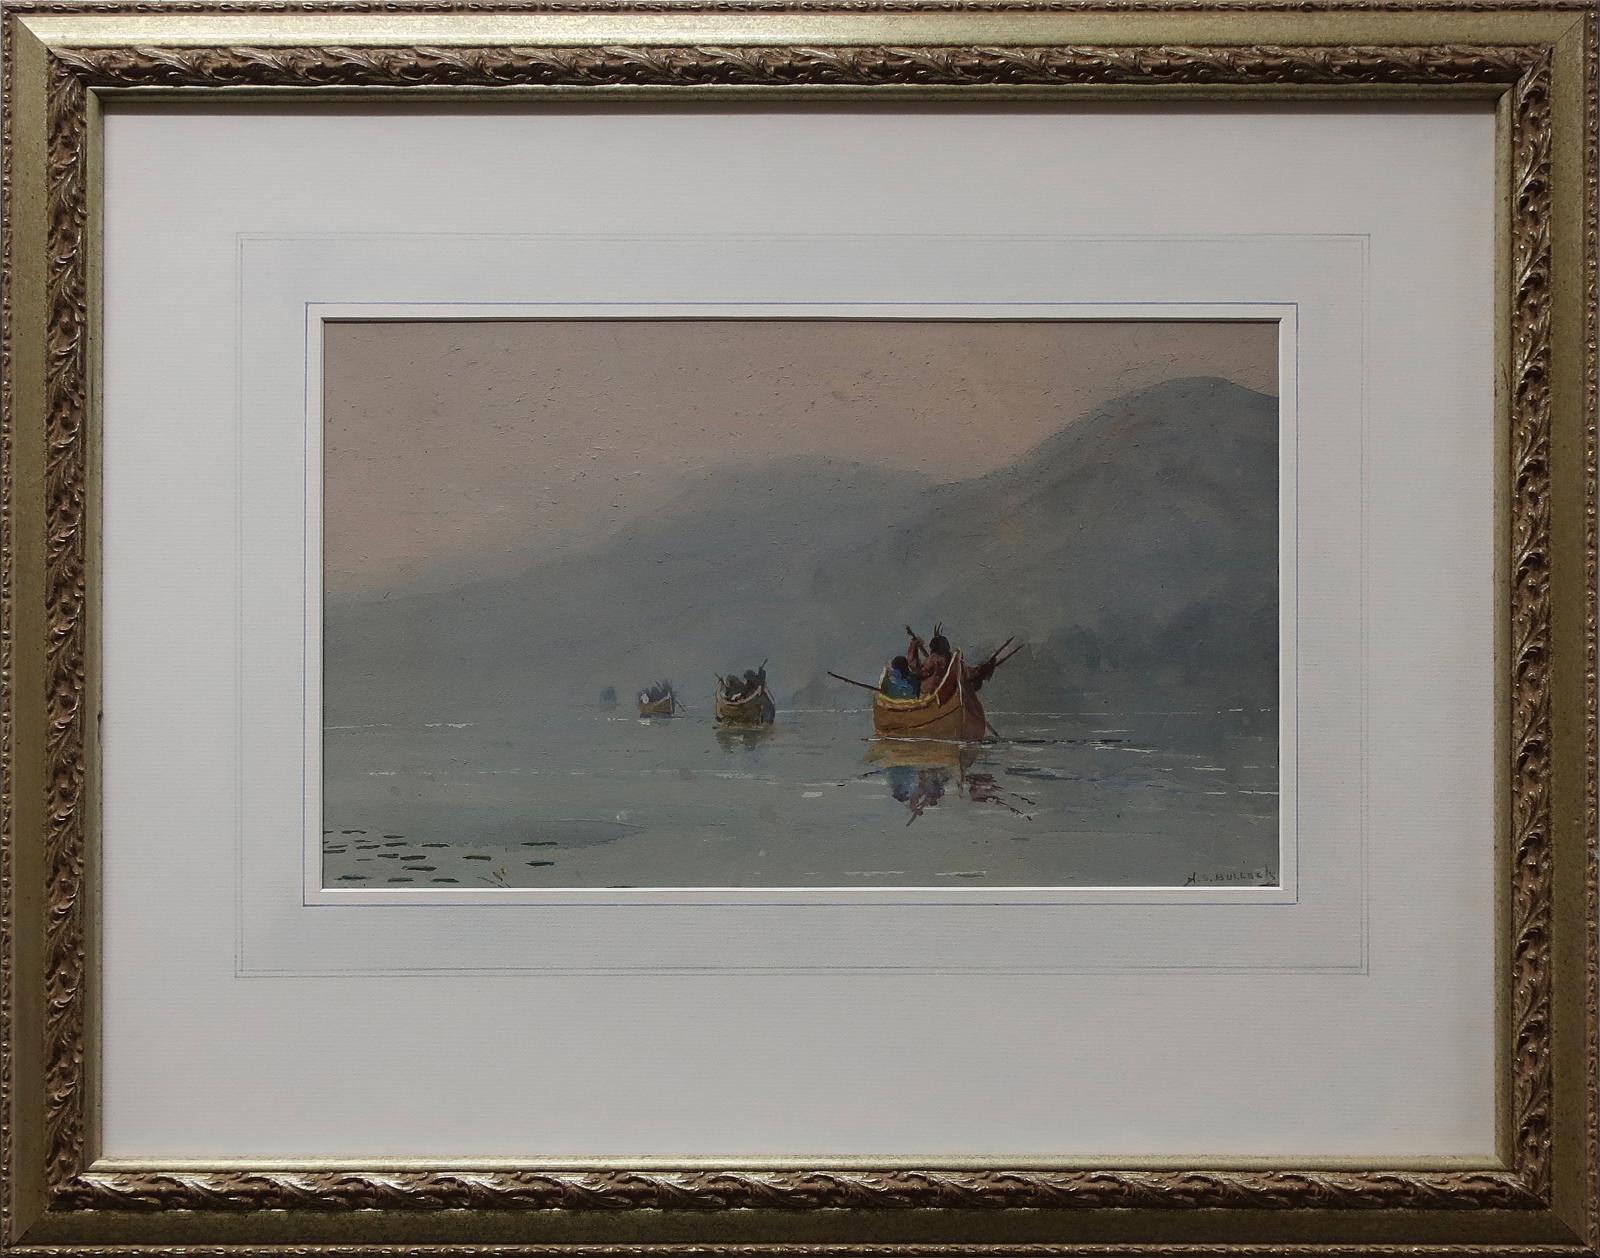 H.S. Bullock - Untitled (Indigenous Canoers On A Misty Morning)